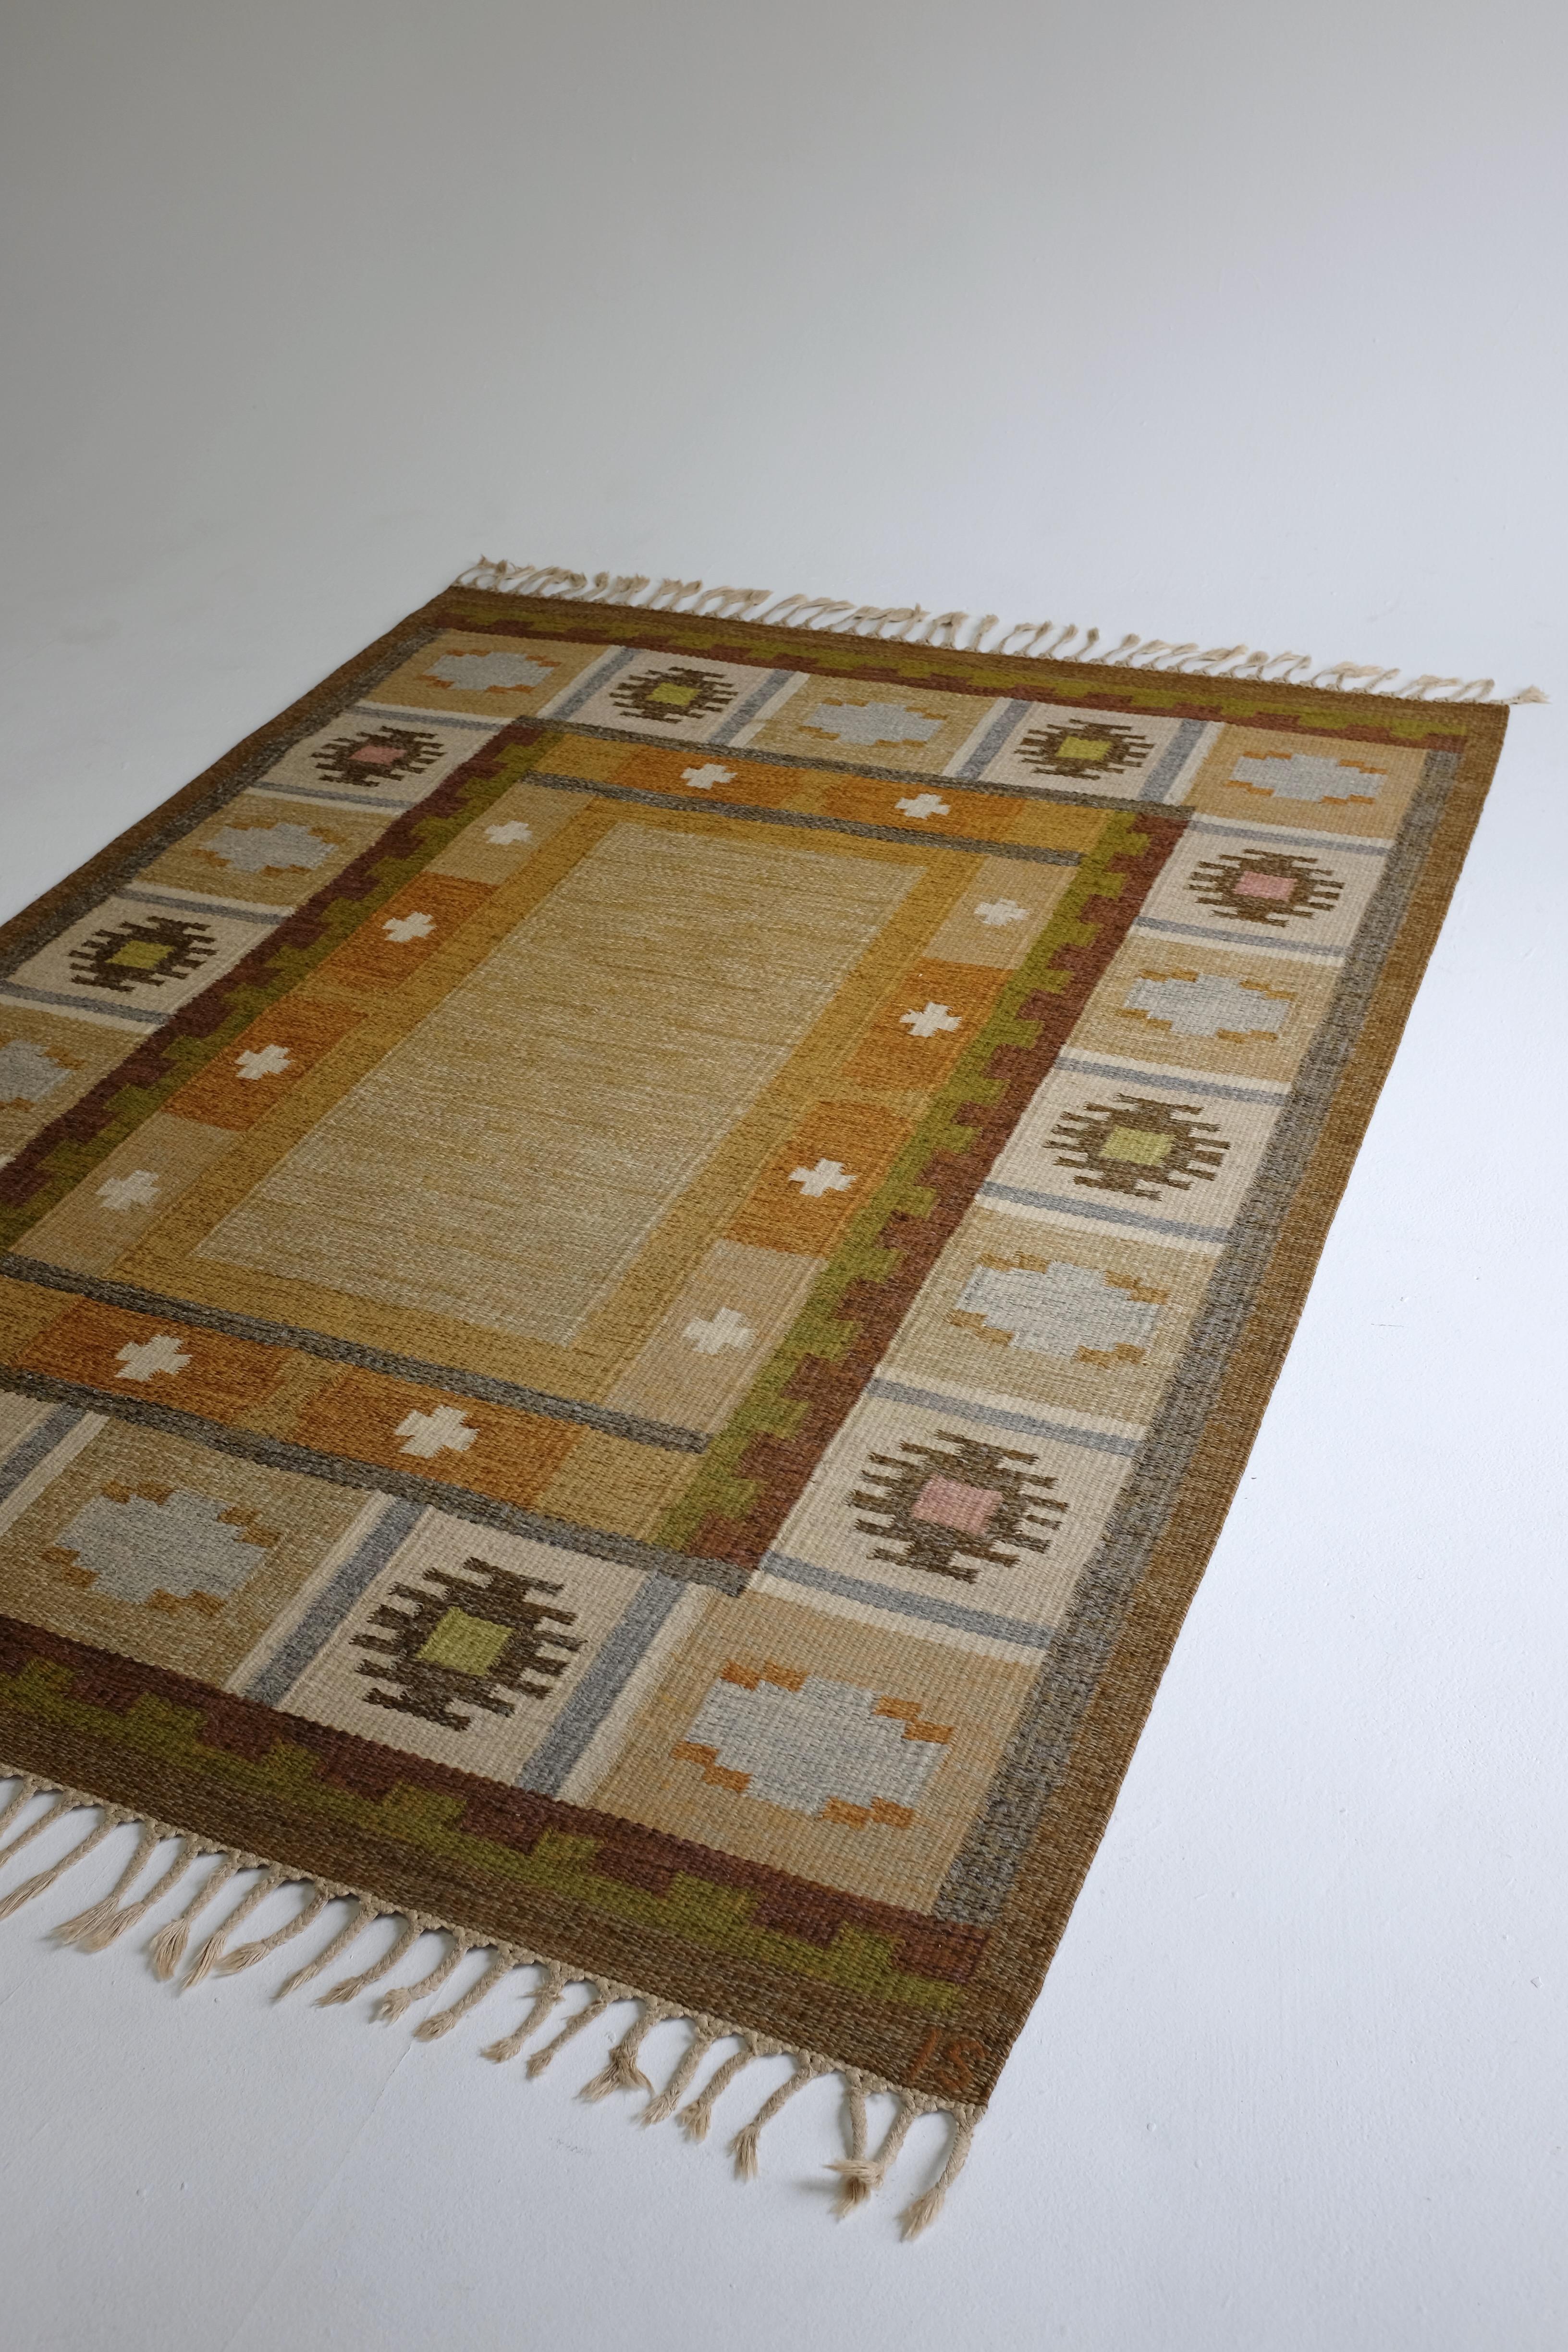 A classic Ingegerd Silow rug in the design called 